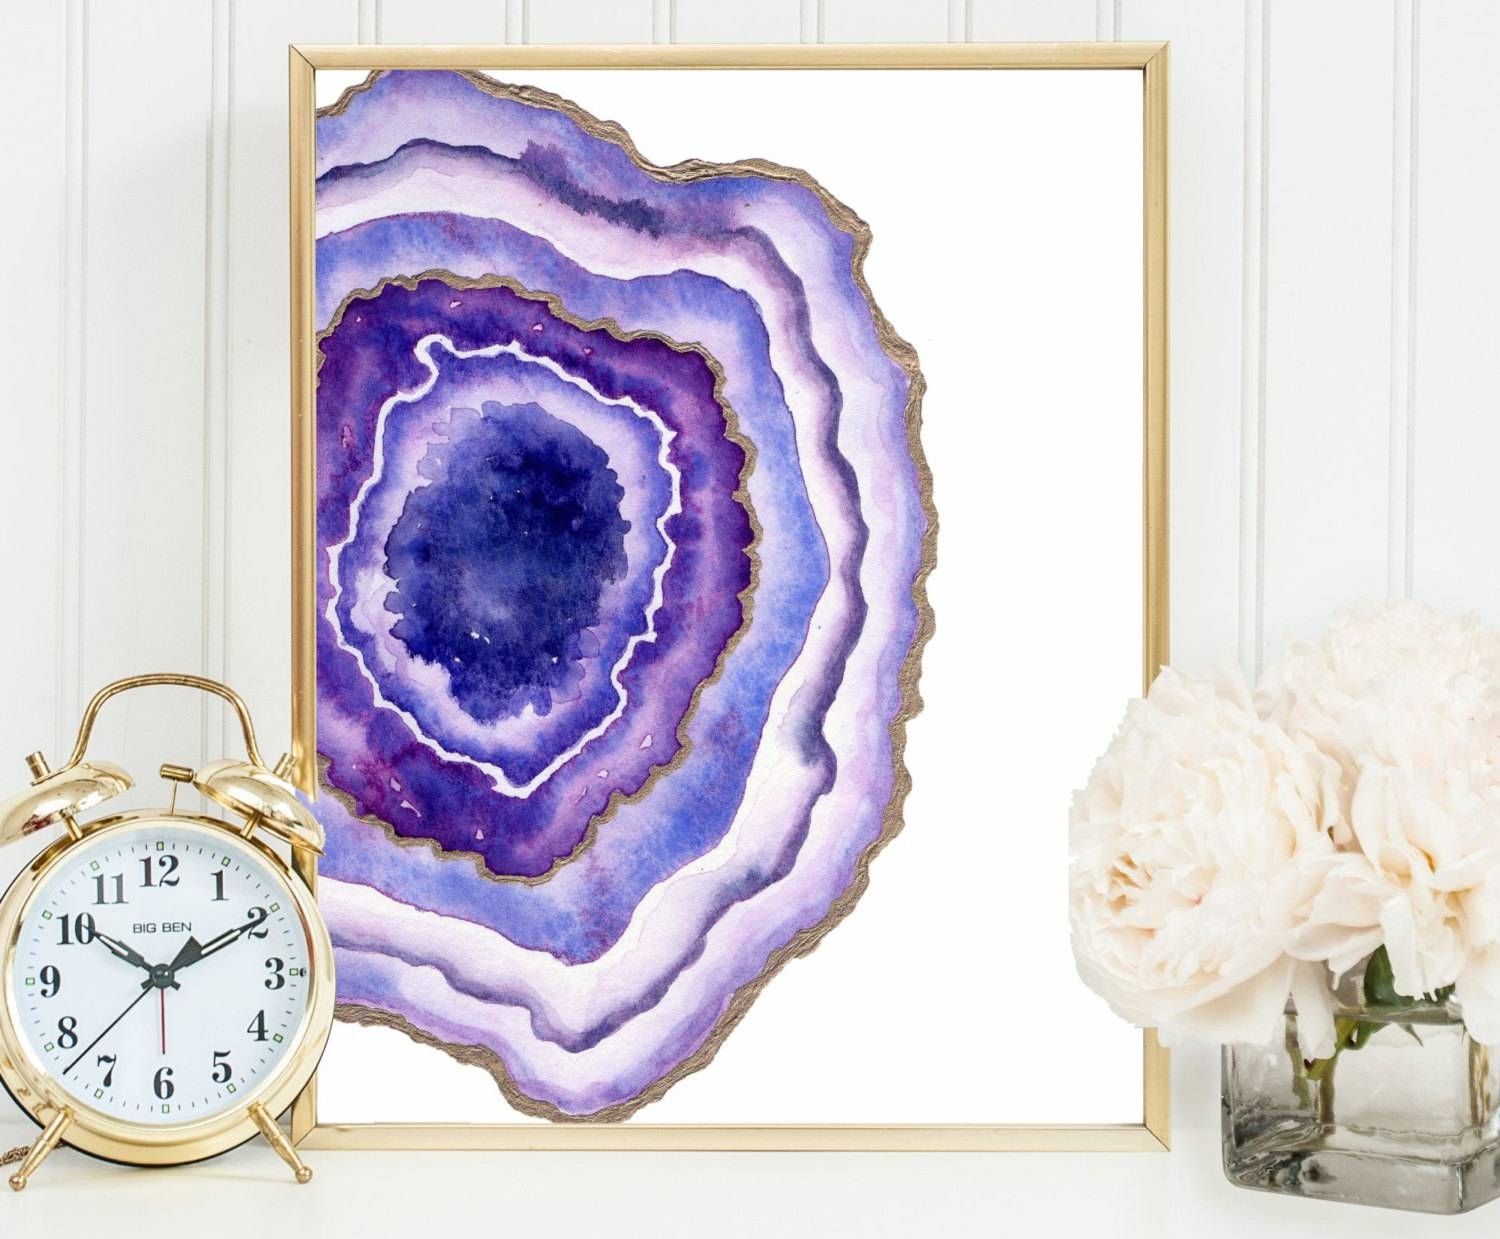 Geode Agate Slice Art Geode Print Gemstone Wall Decor For Most Recently Released Gemstone Wall Art (View 5 of 31)